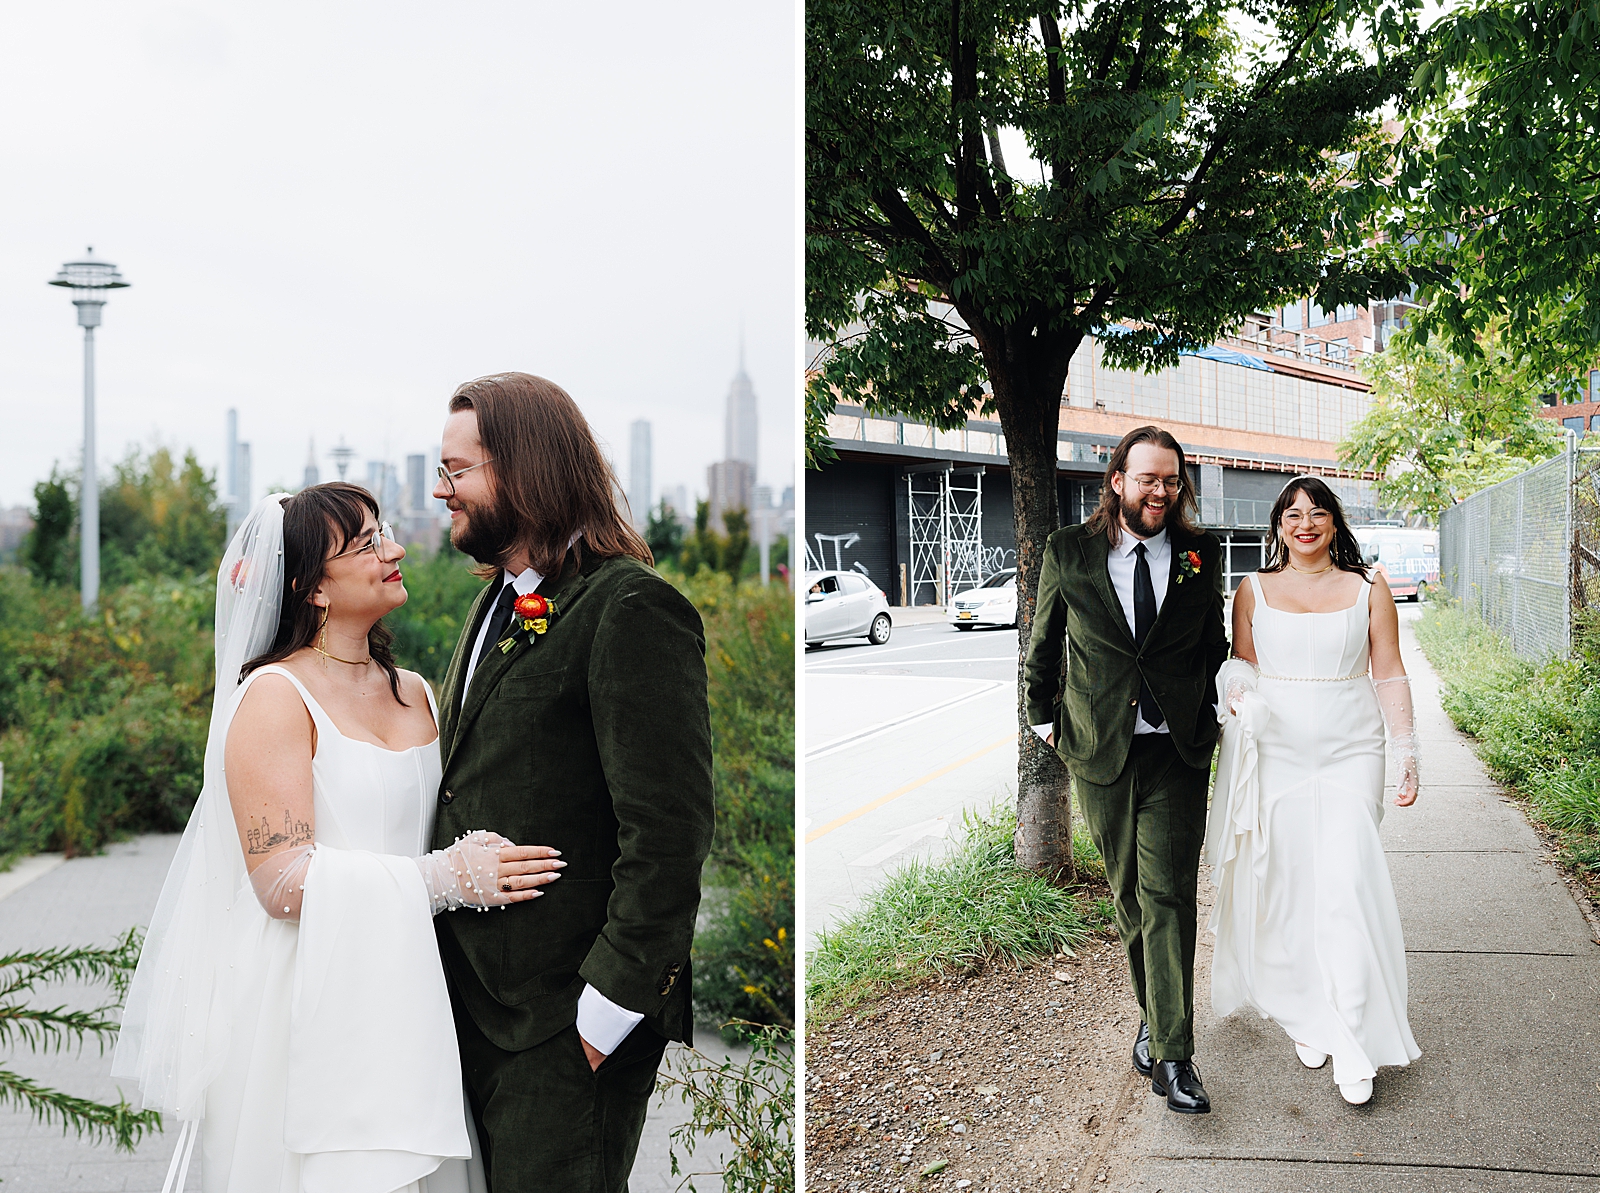 Left photo: Shot of the bride and groom smiling at each other with the Manhattan skyline in the background. 
Right photo: Shot of the bride and groom smiling as they walk down a Brooklyn sidewalk. 